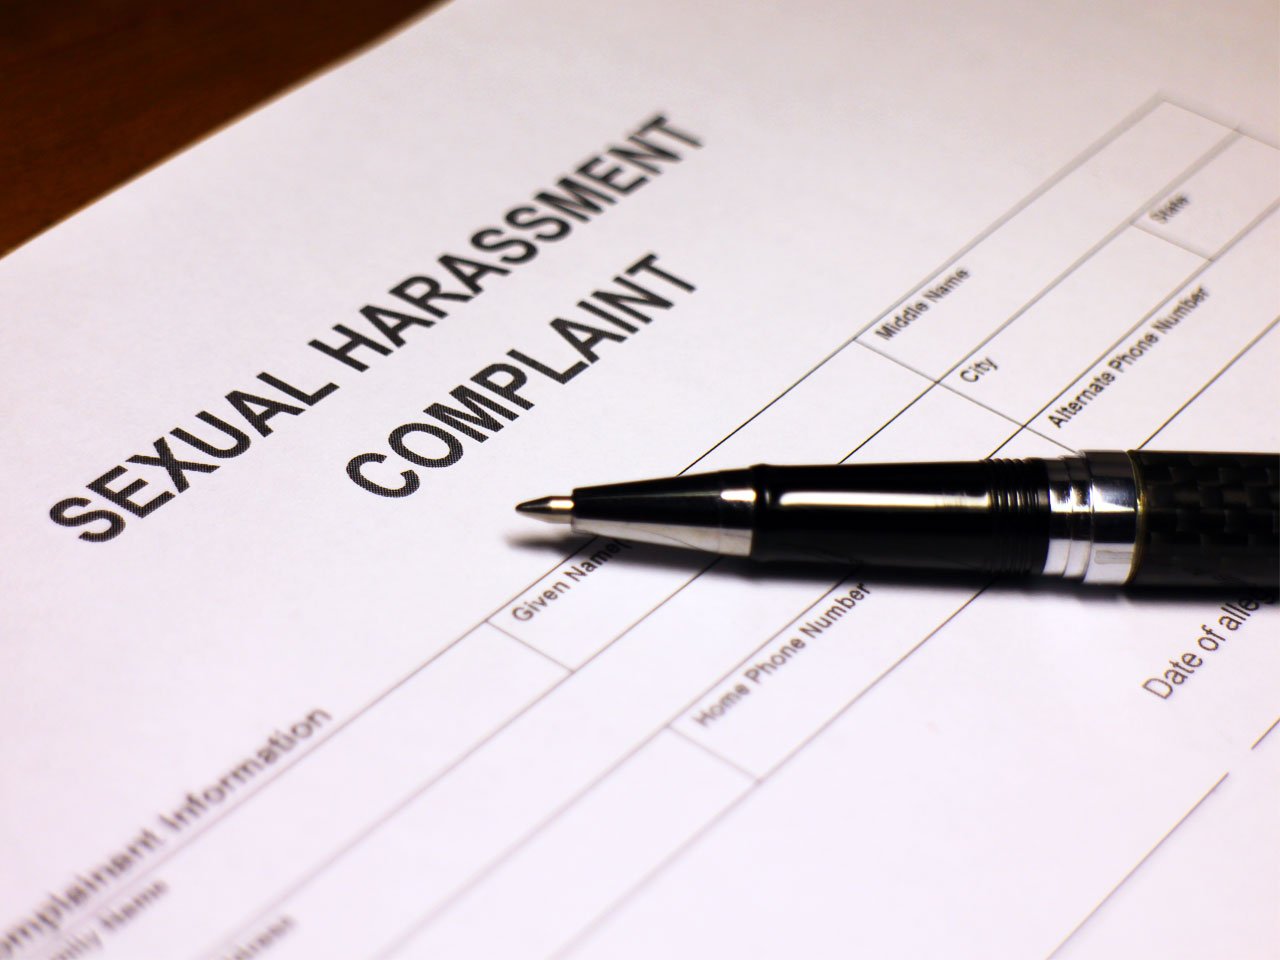 So You’ve Been Harassed At Work — Should You Go To HR?